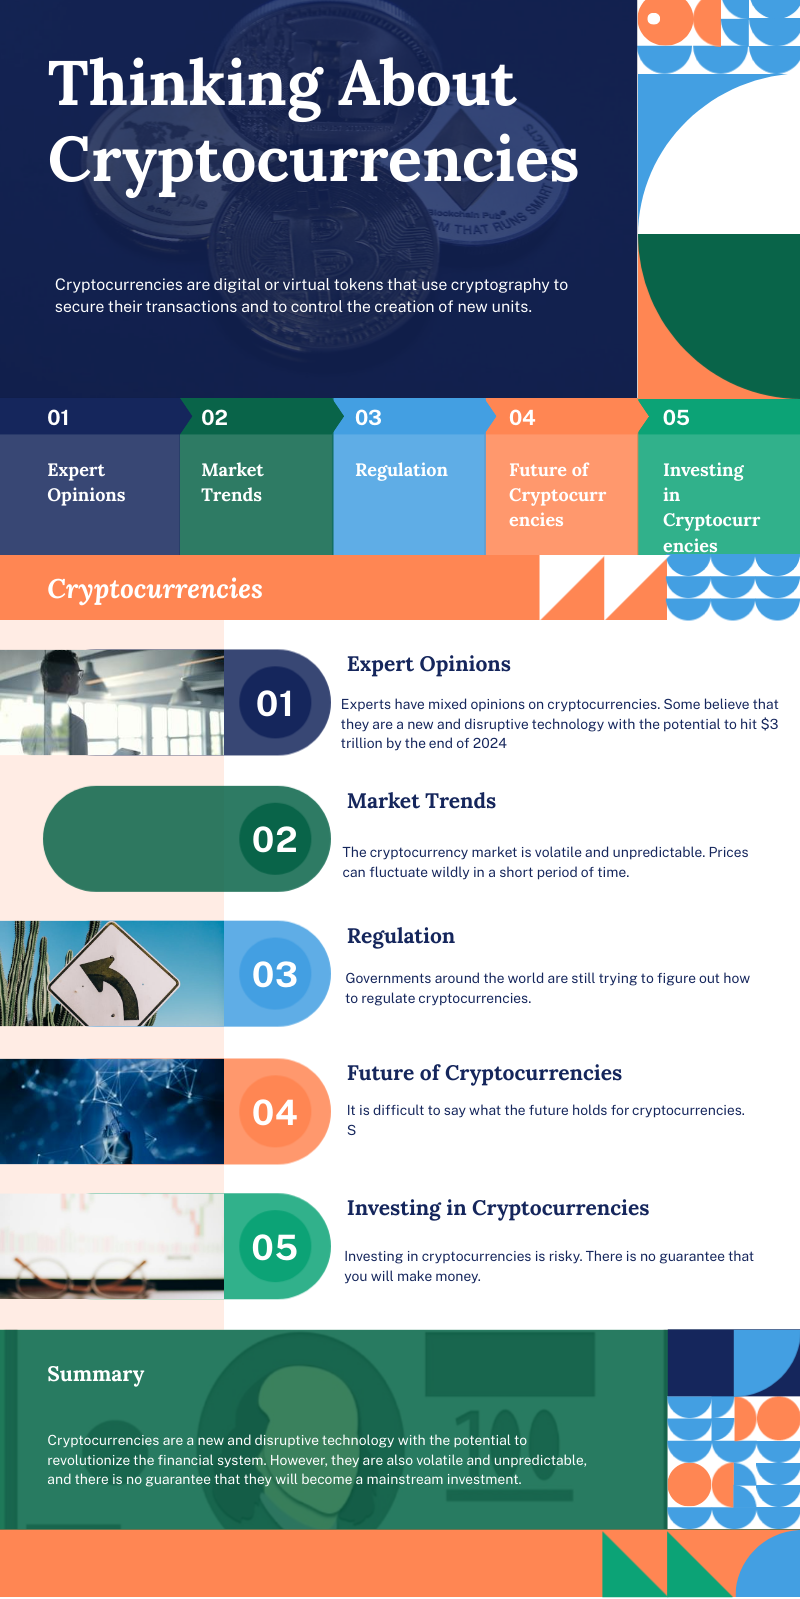 Infographic highlighting risks of cryptocurrency investing. Includes points on volatility with a fluctuating price chart, hacking risks for exchanges and wallets, developing regulations with unclear rights, tax complexities differing from traditional investments, and the absence of federal consumer protection against fraud."